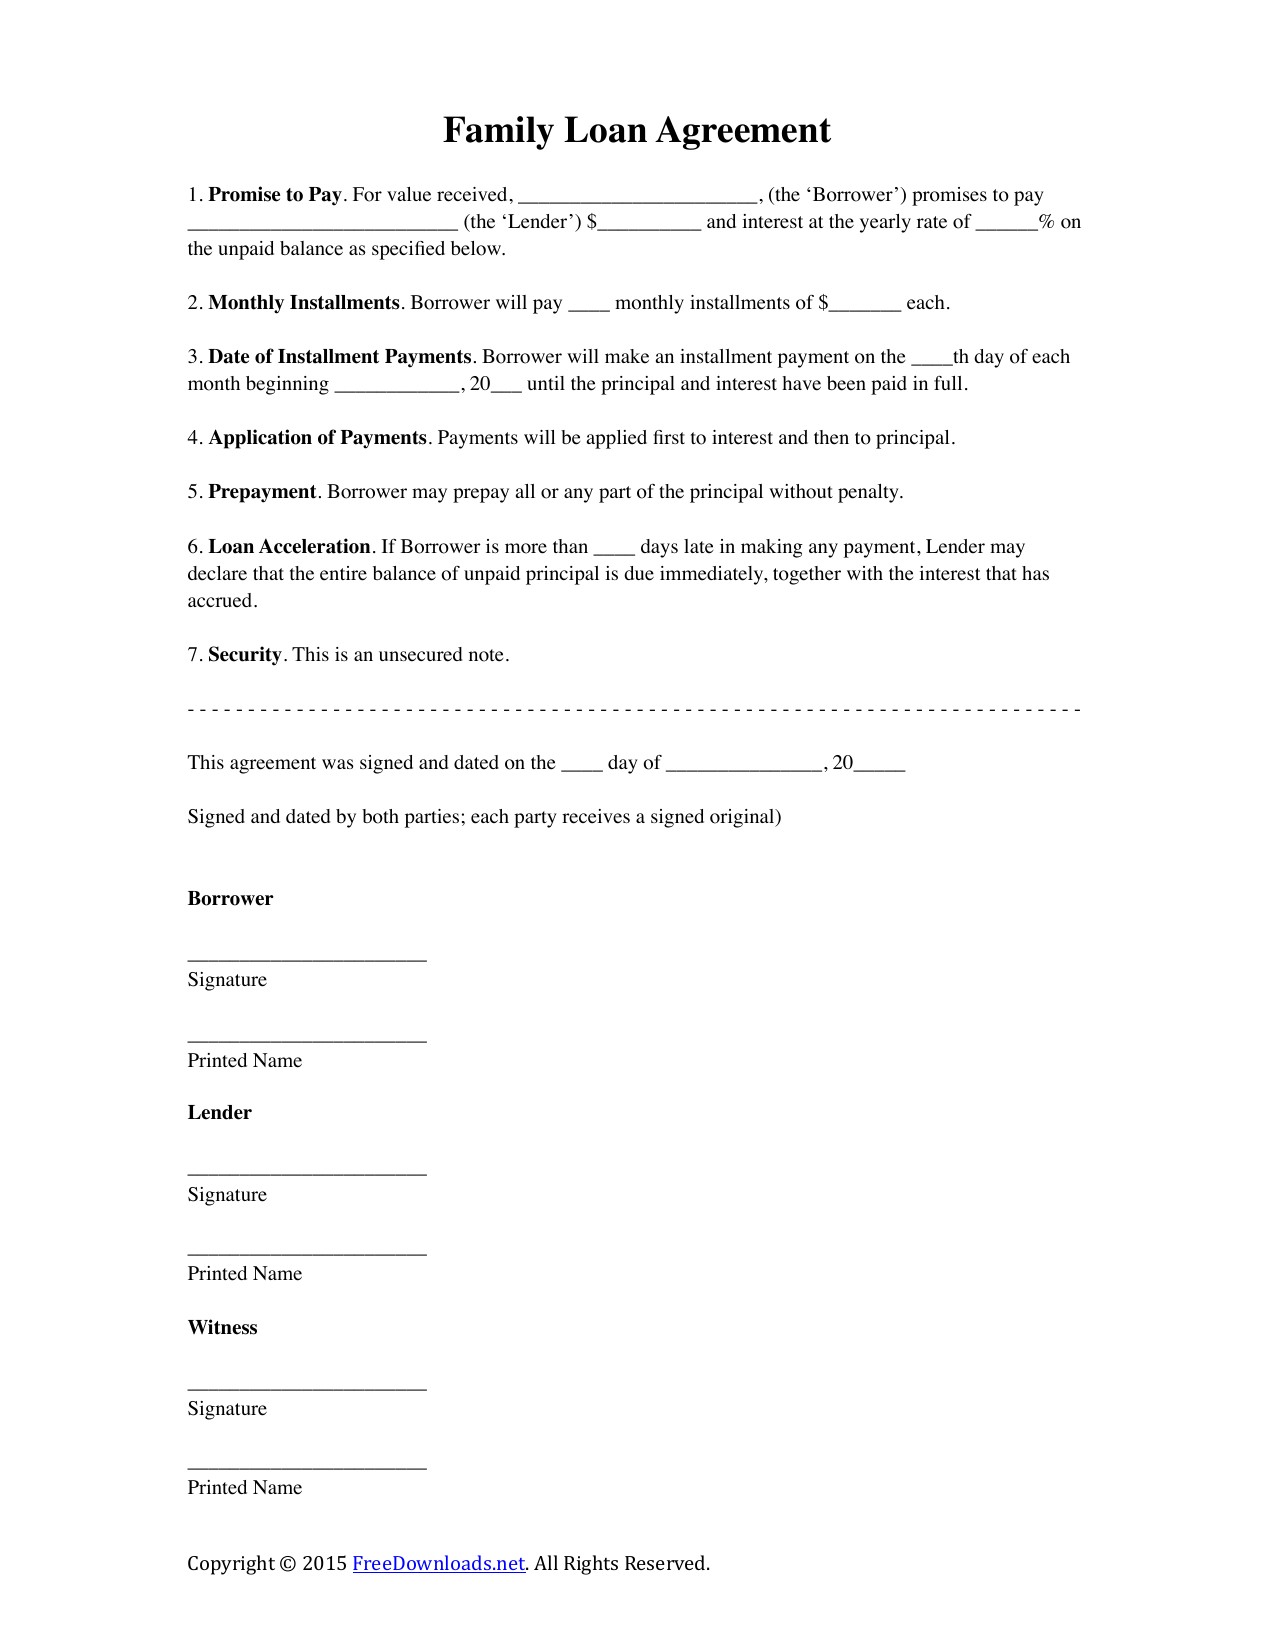 Download Family Loan Agreement Template PDF RTF Word Document Contract For Borrowing Money From